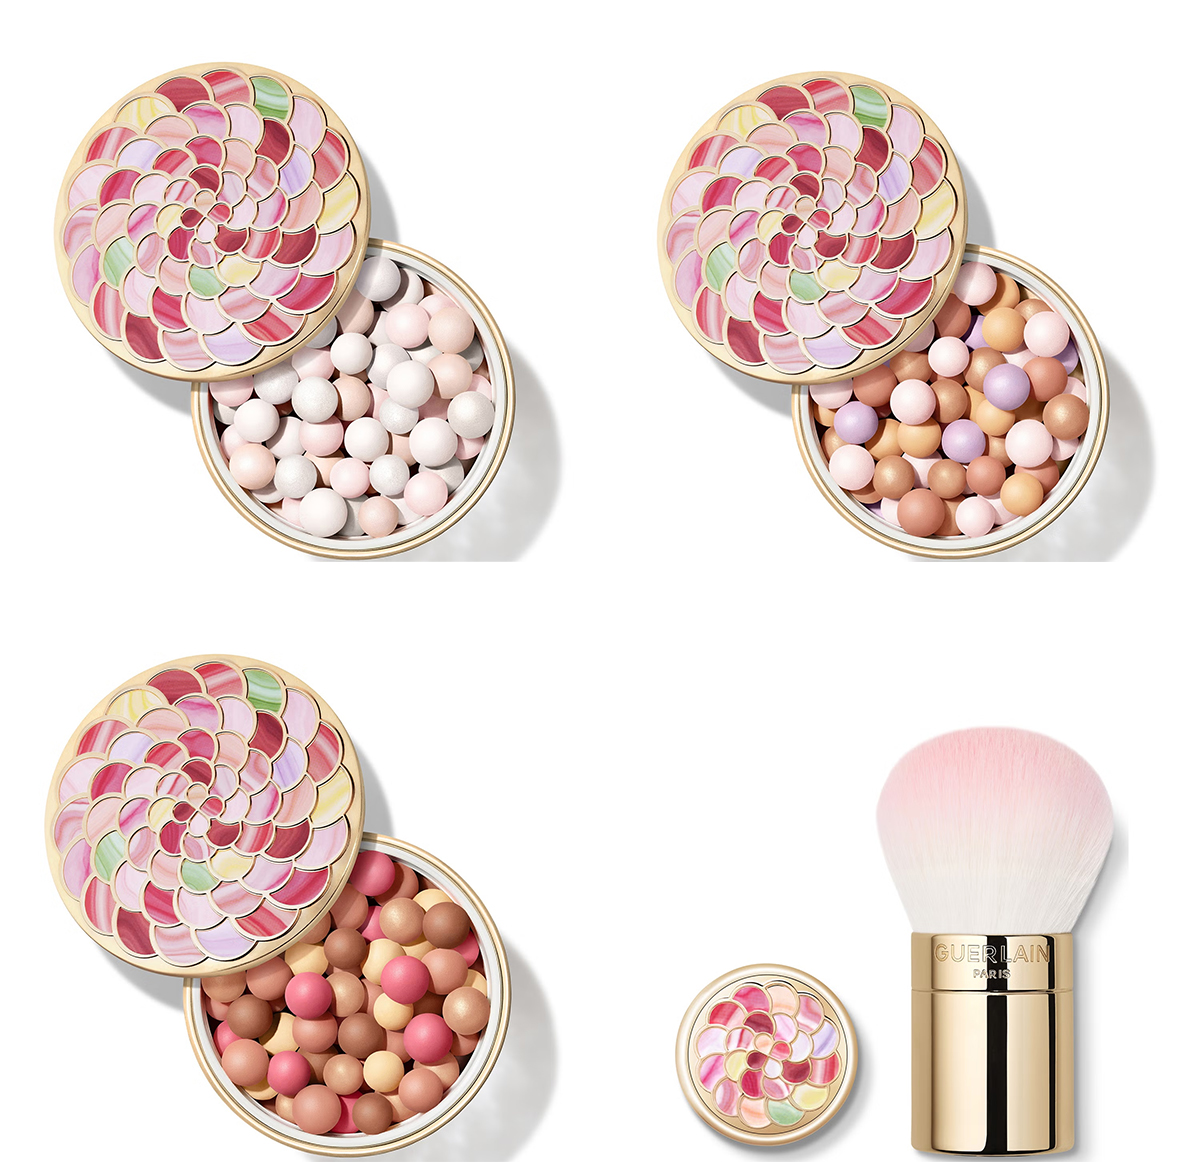 New launches from Guerlain at Lookfantastic